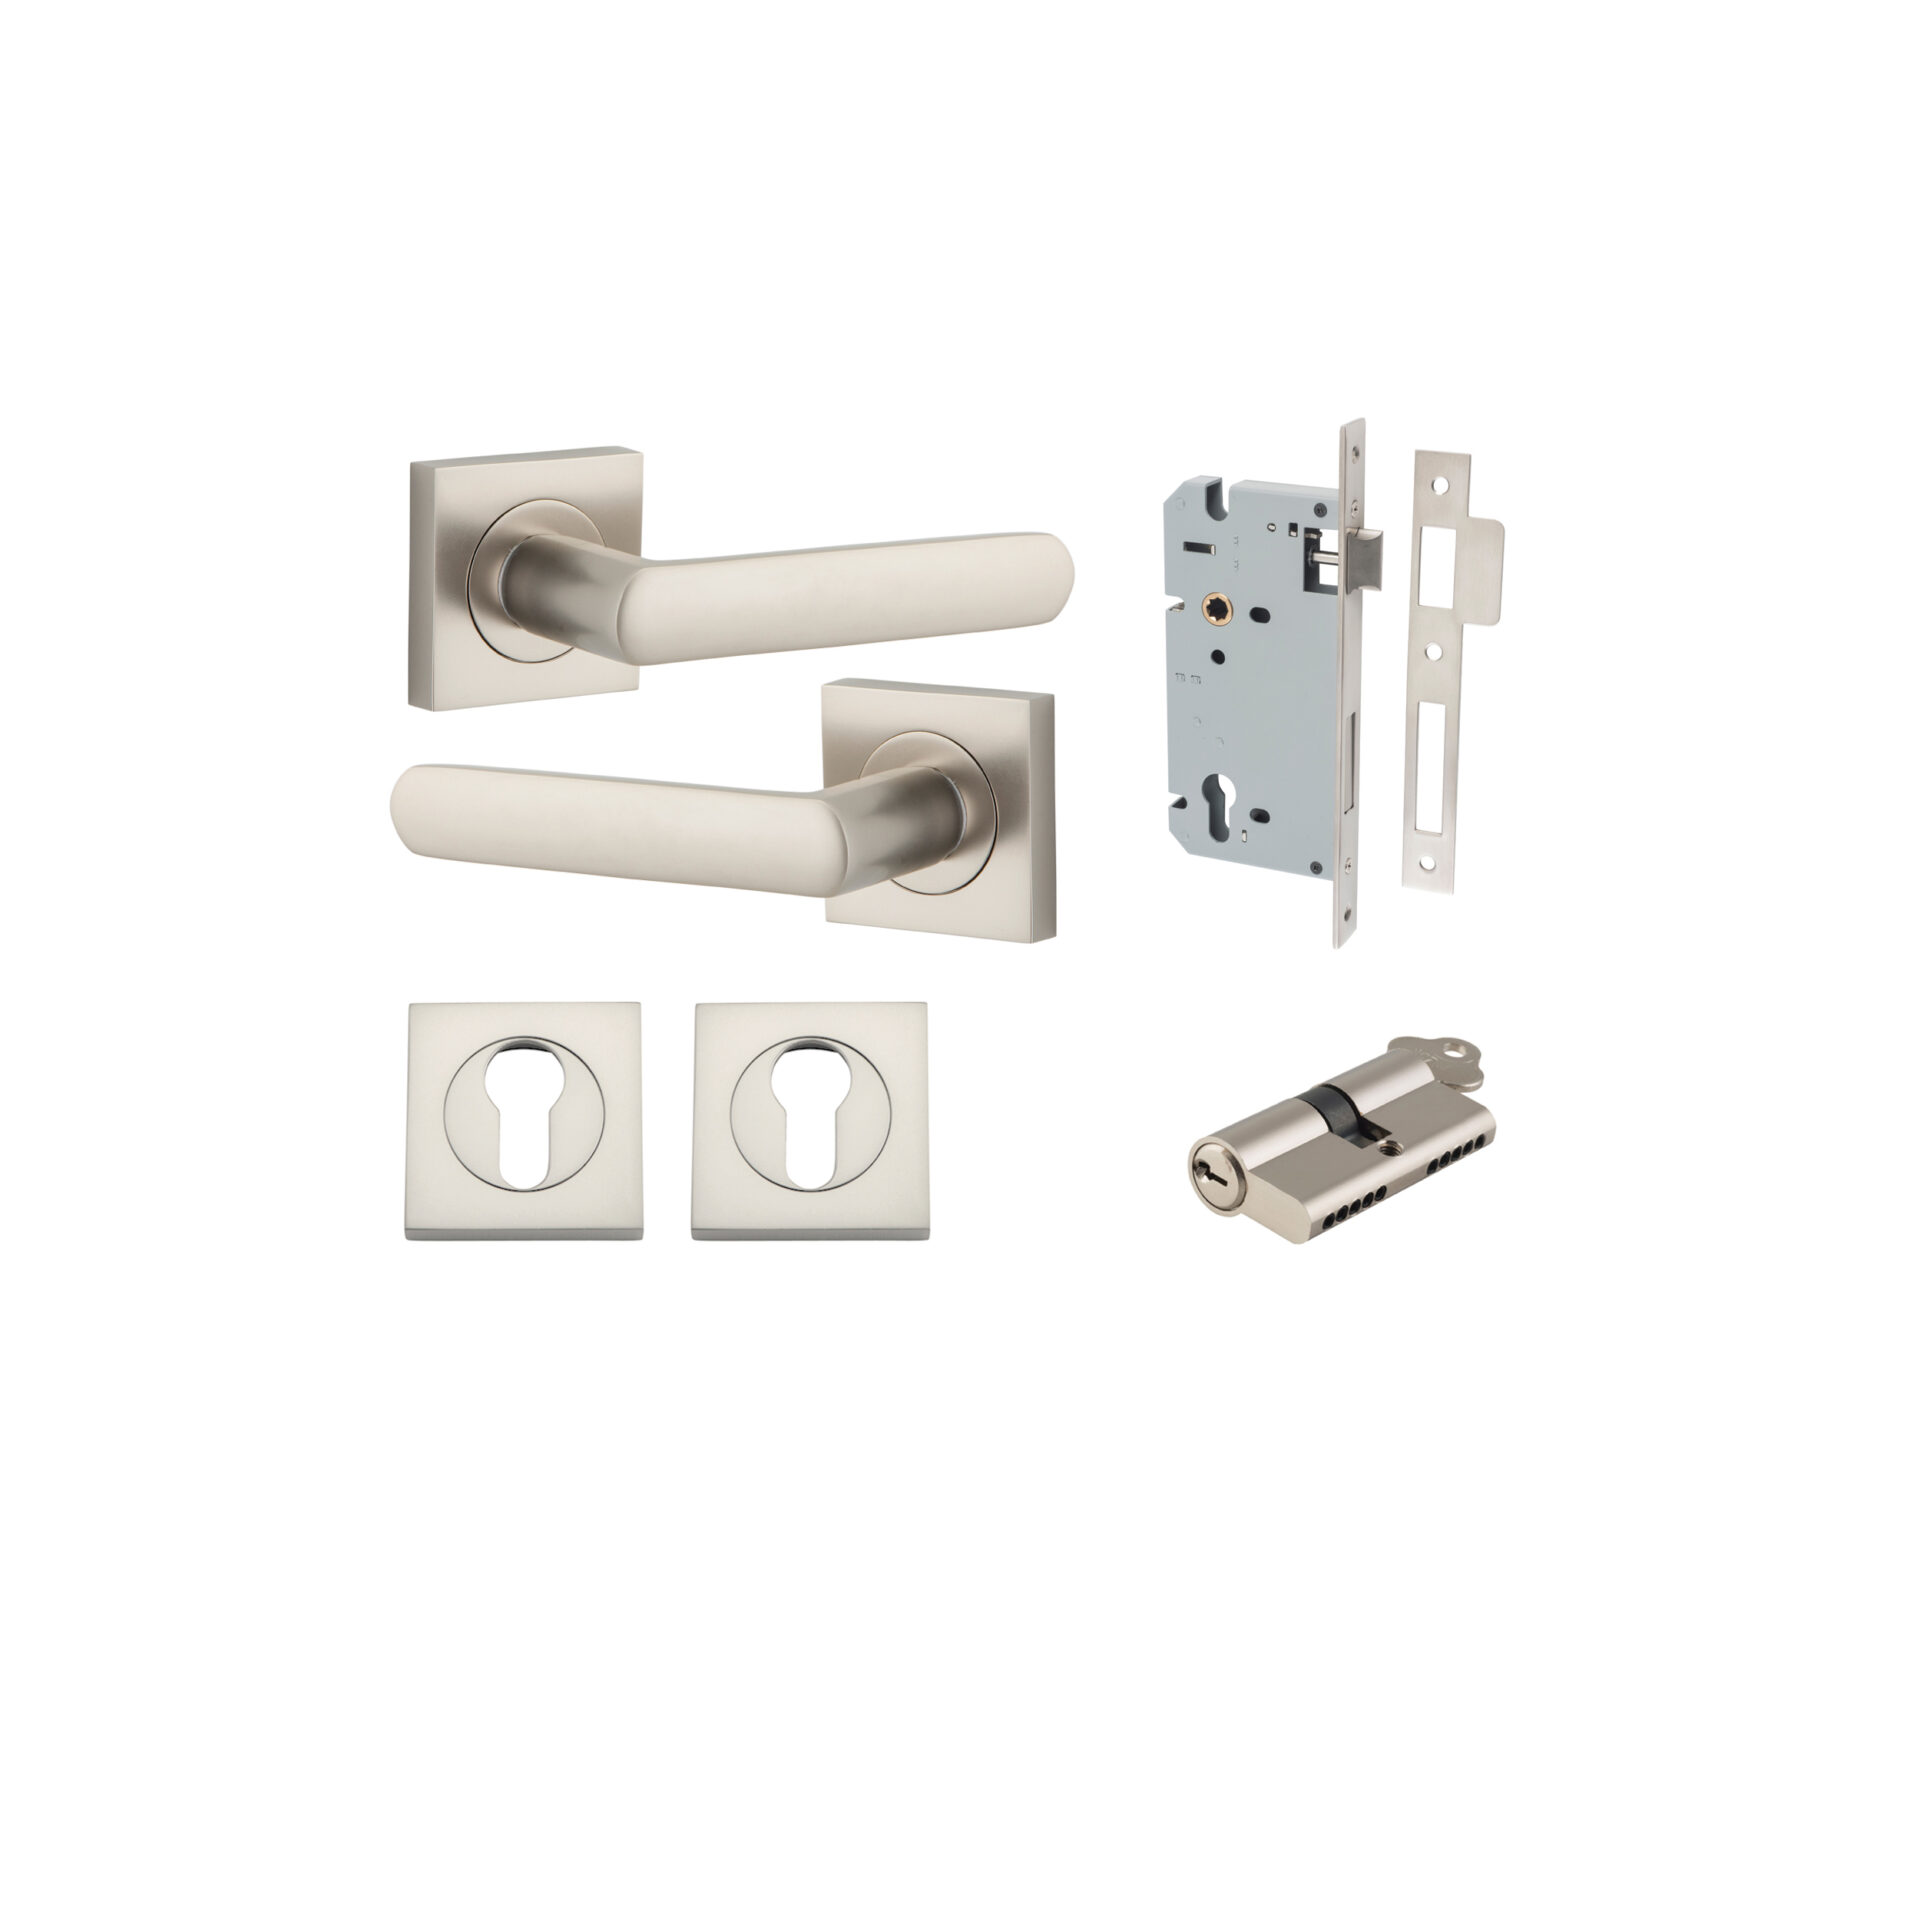 Osaka Lever - Square Rose Entrance Kit with Separate High Security Lock